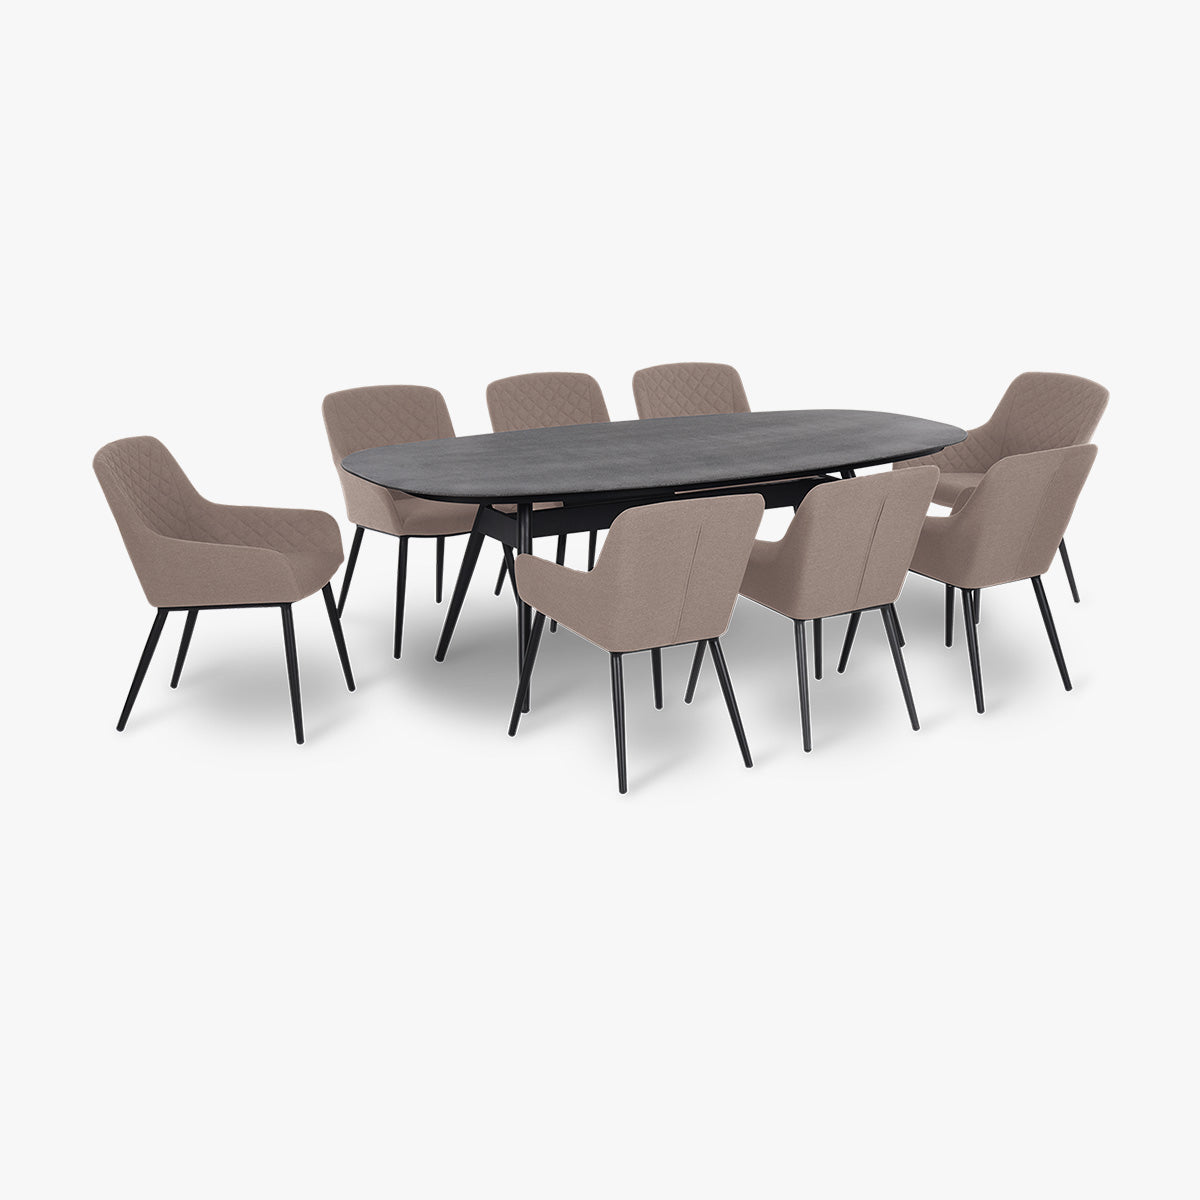 Outdoor Fabric Zest 8 Seat Oval Dining Set